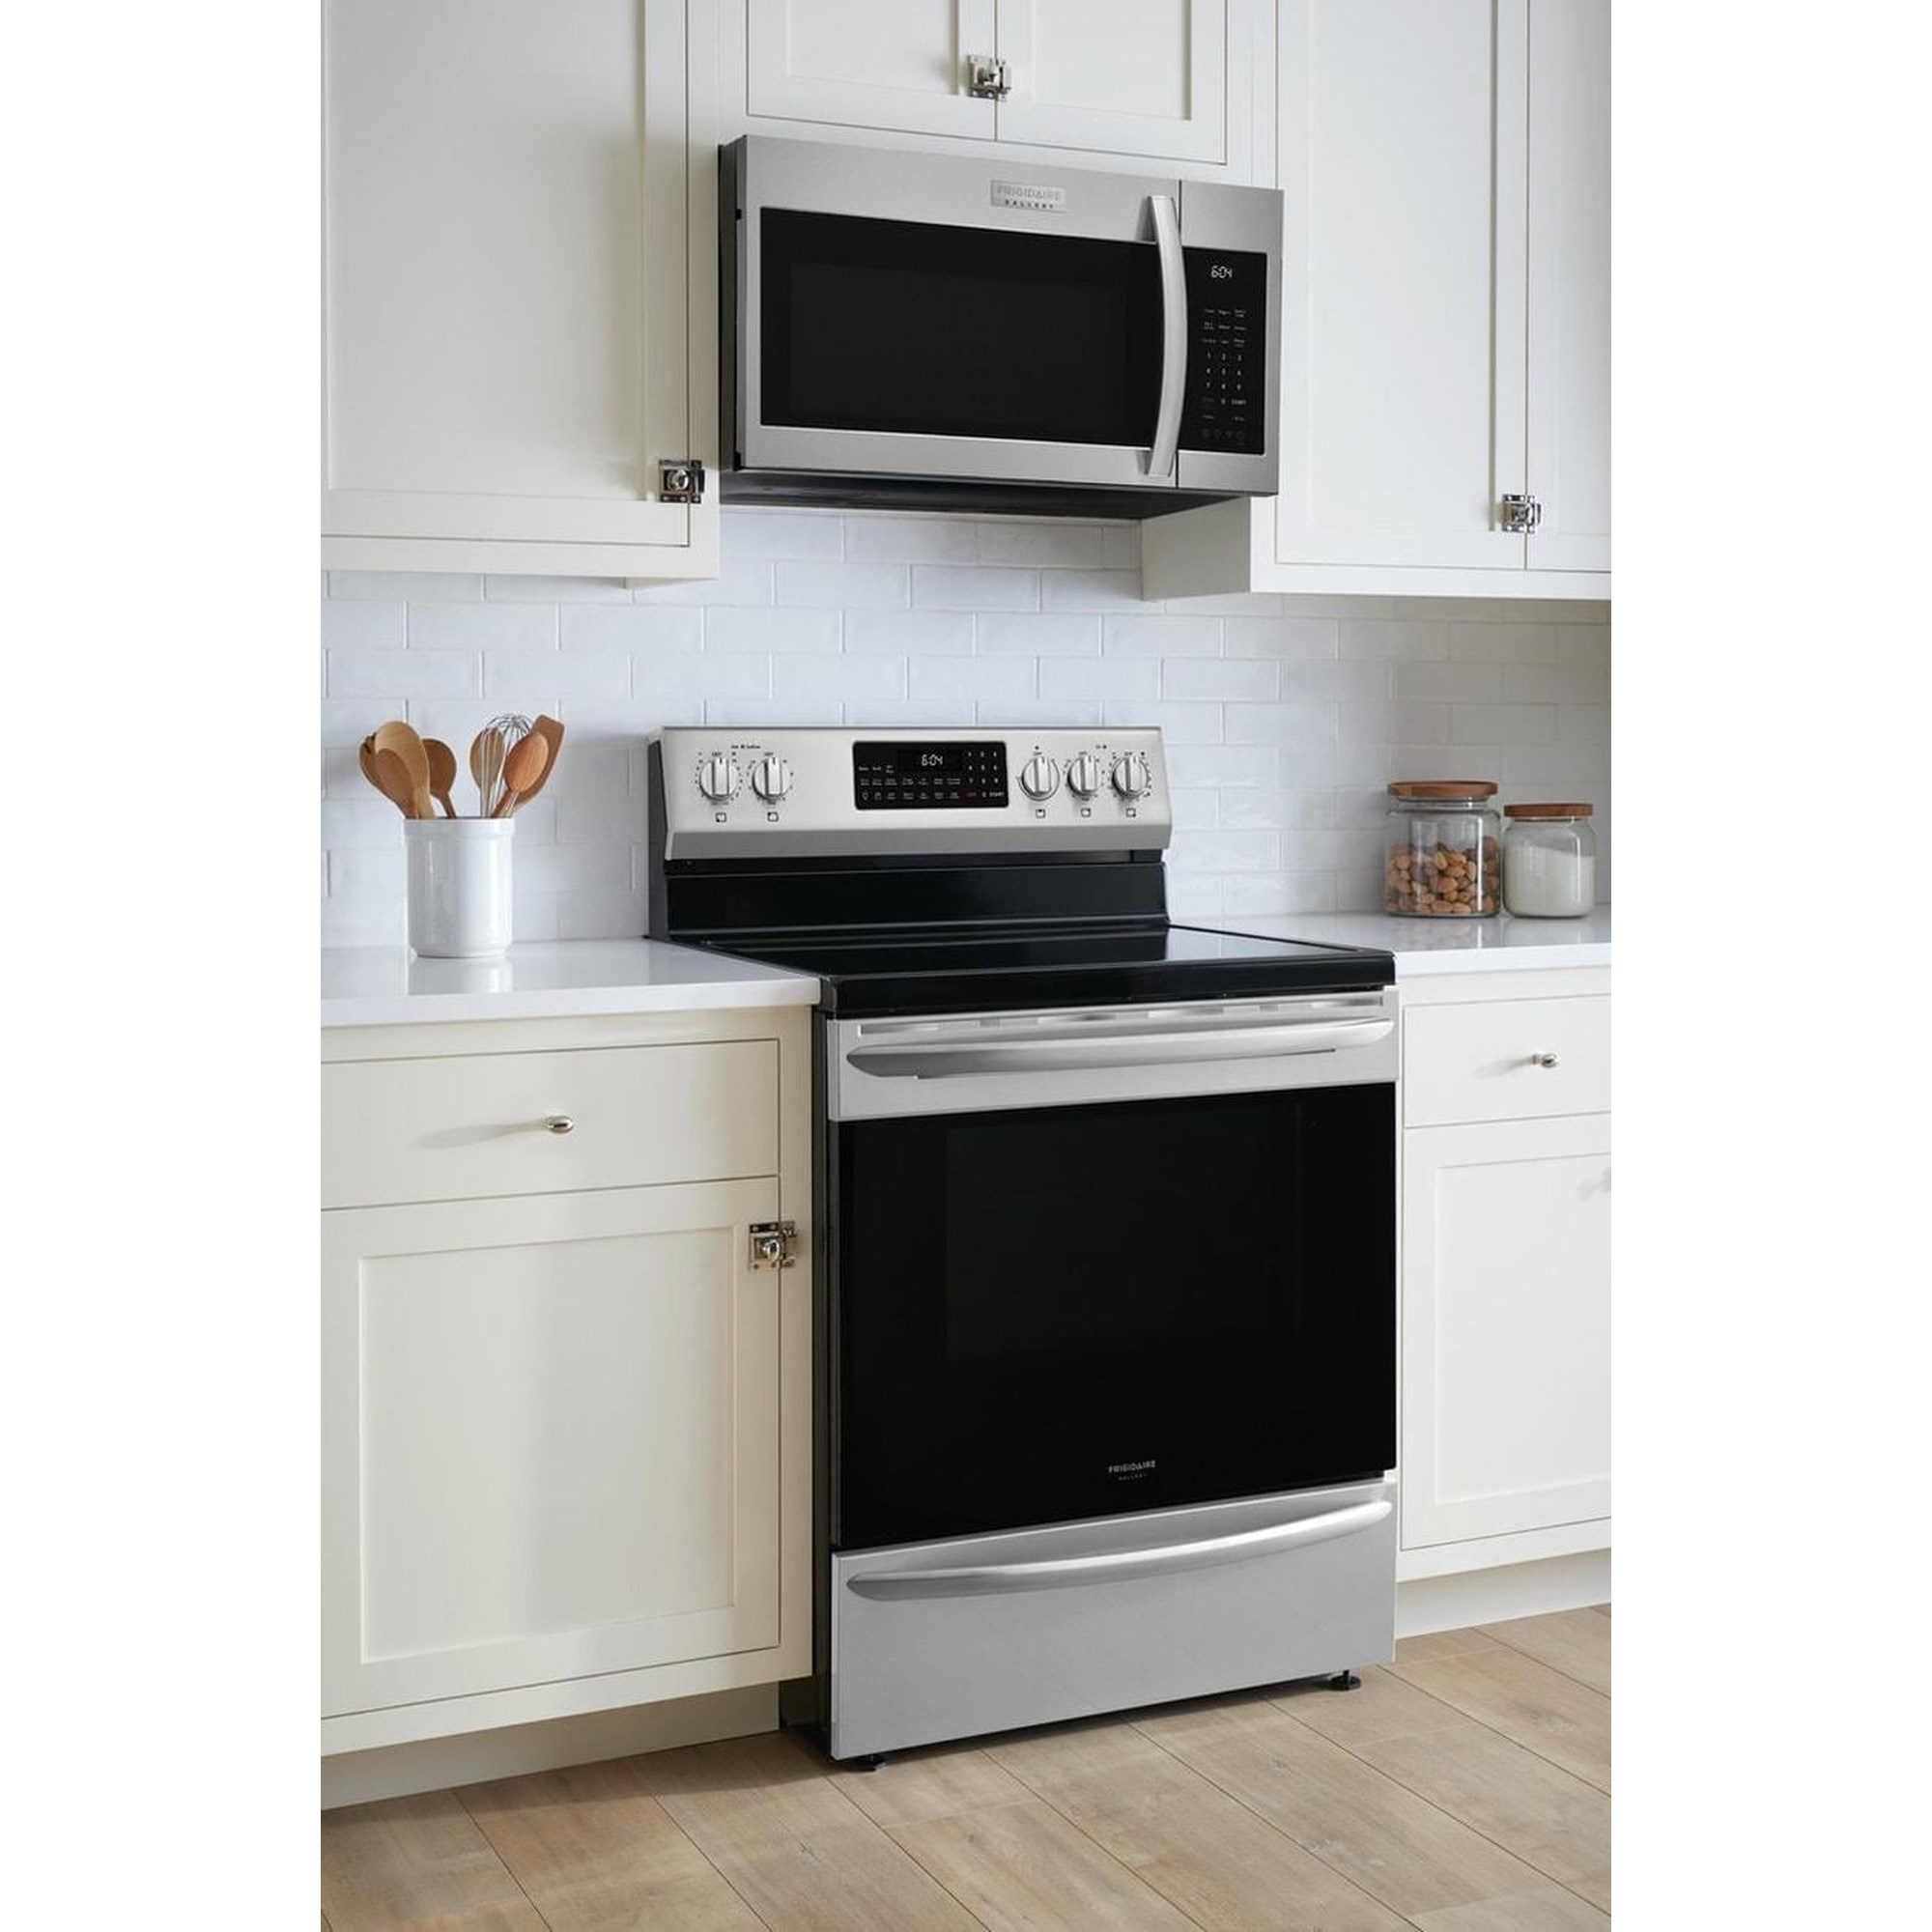 Frigidaire FFEF3054TS 30 Inch Electric Freestanding Range Stainless Steel 